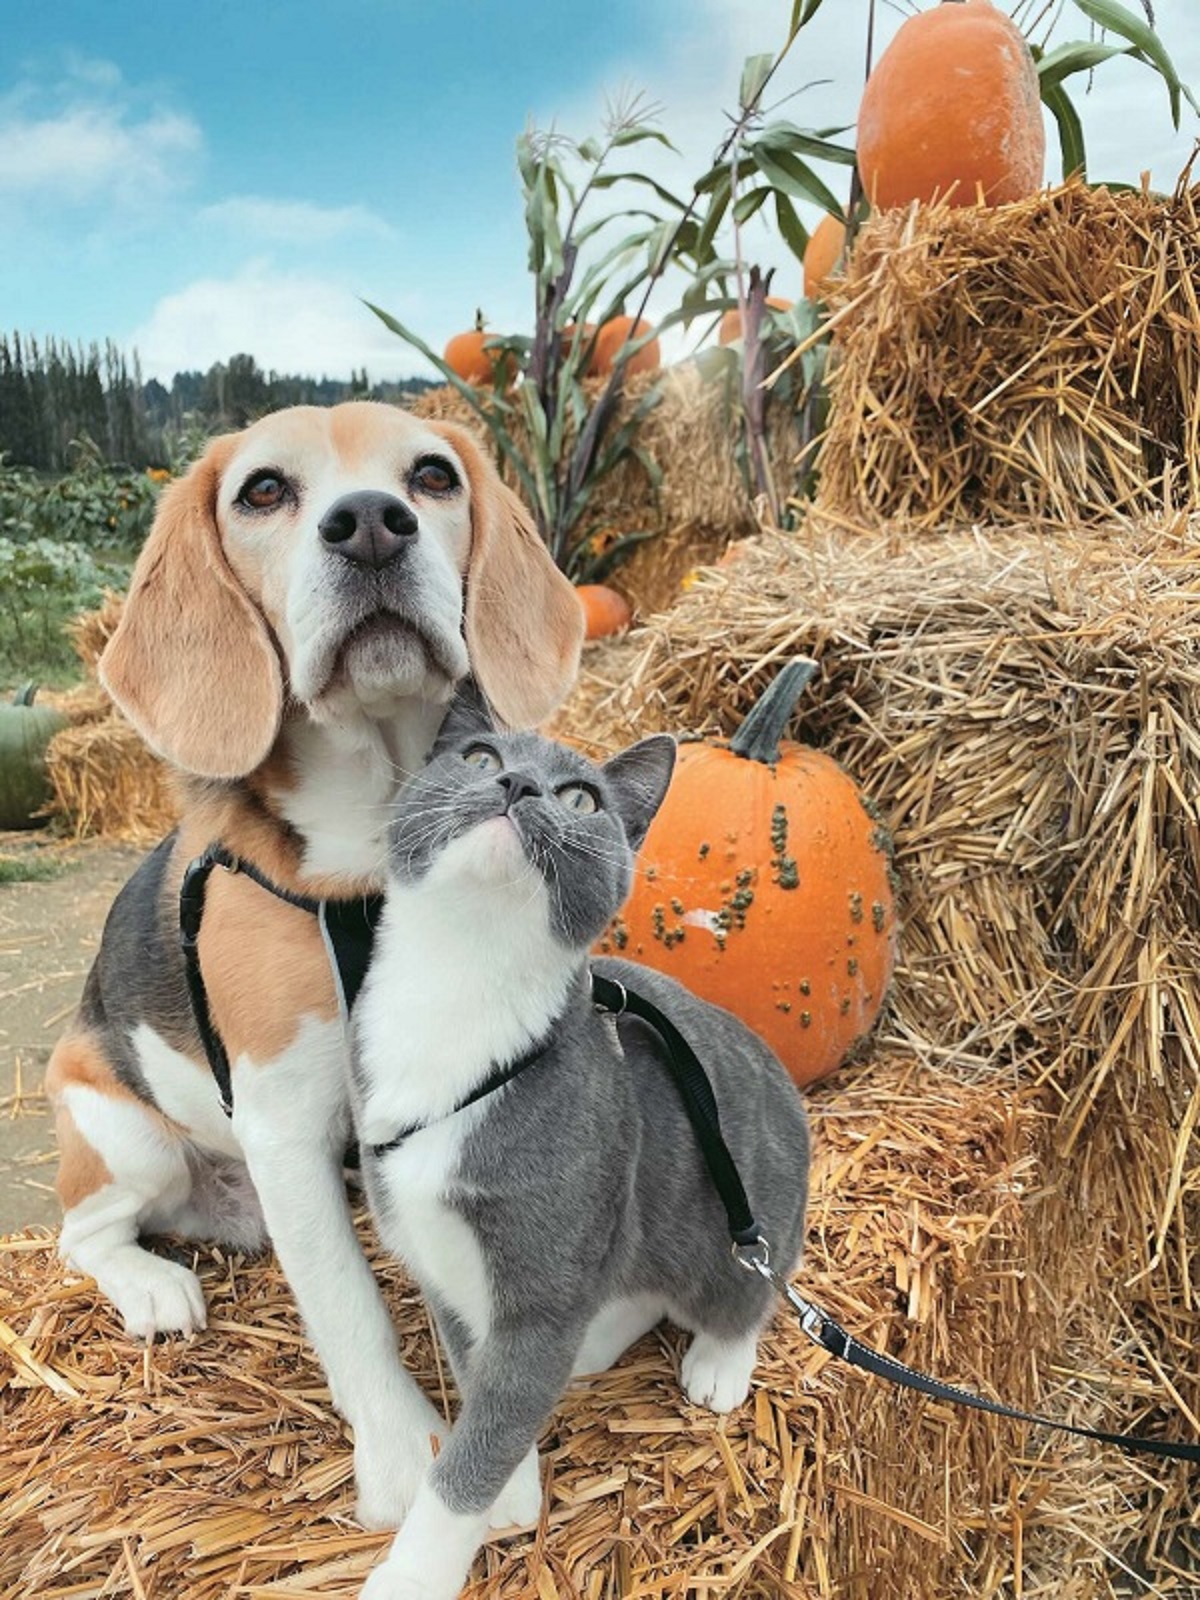 Most Adorable Cat And Beagle Photo Shoot in a Pumpkin Patch